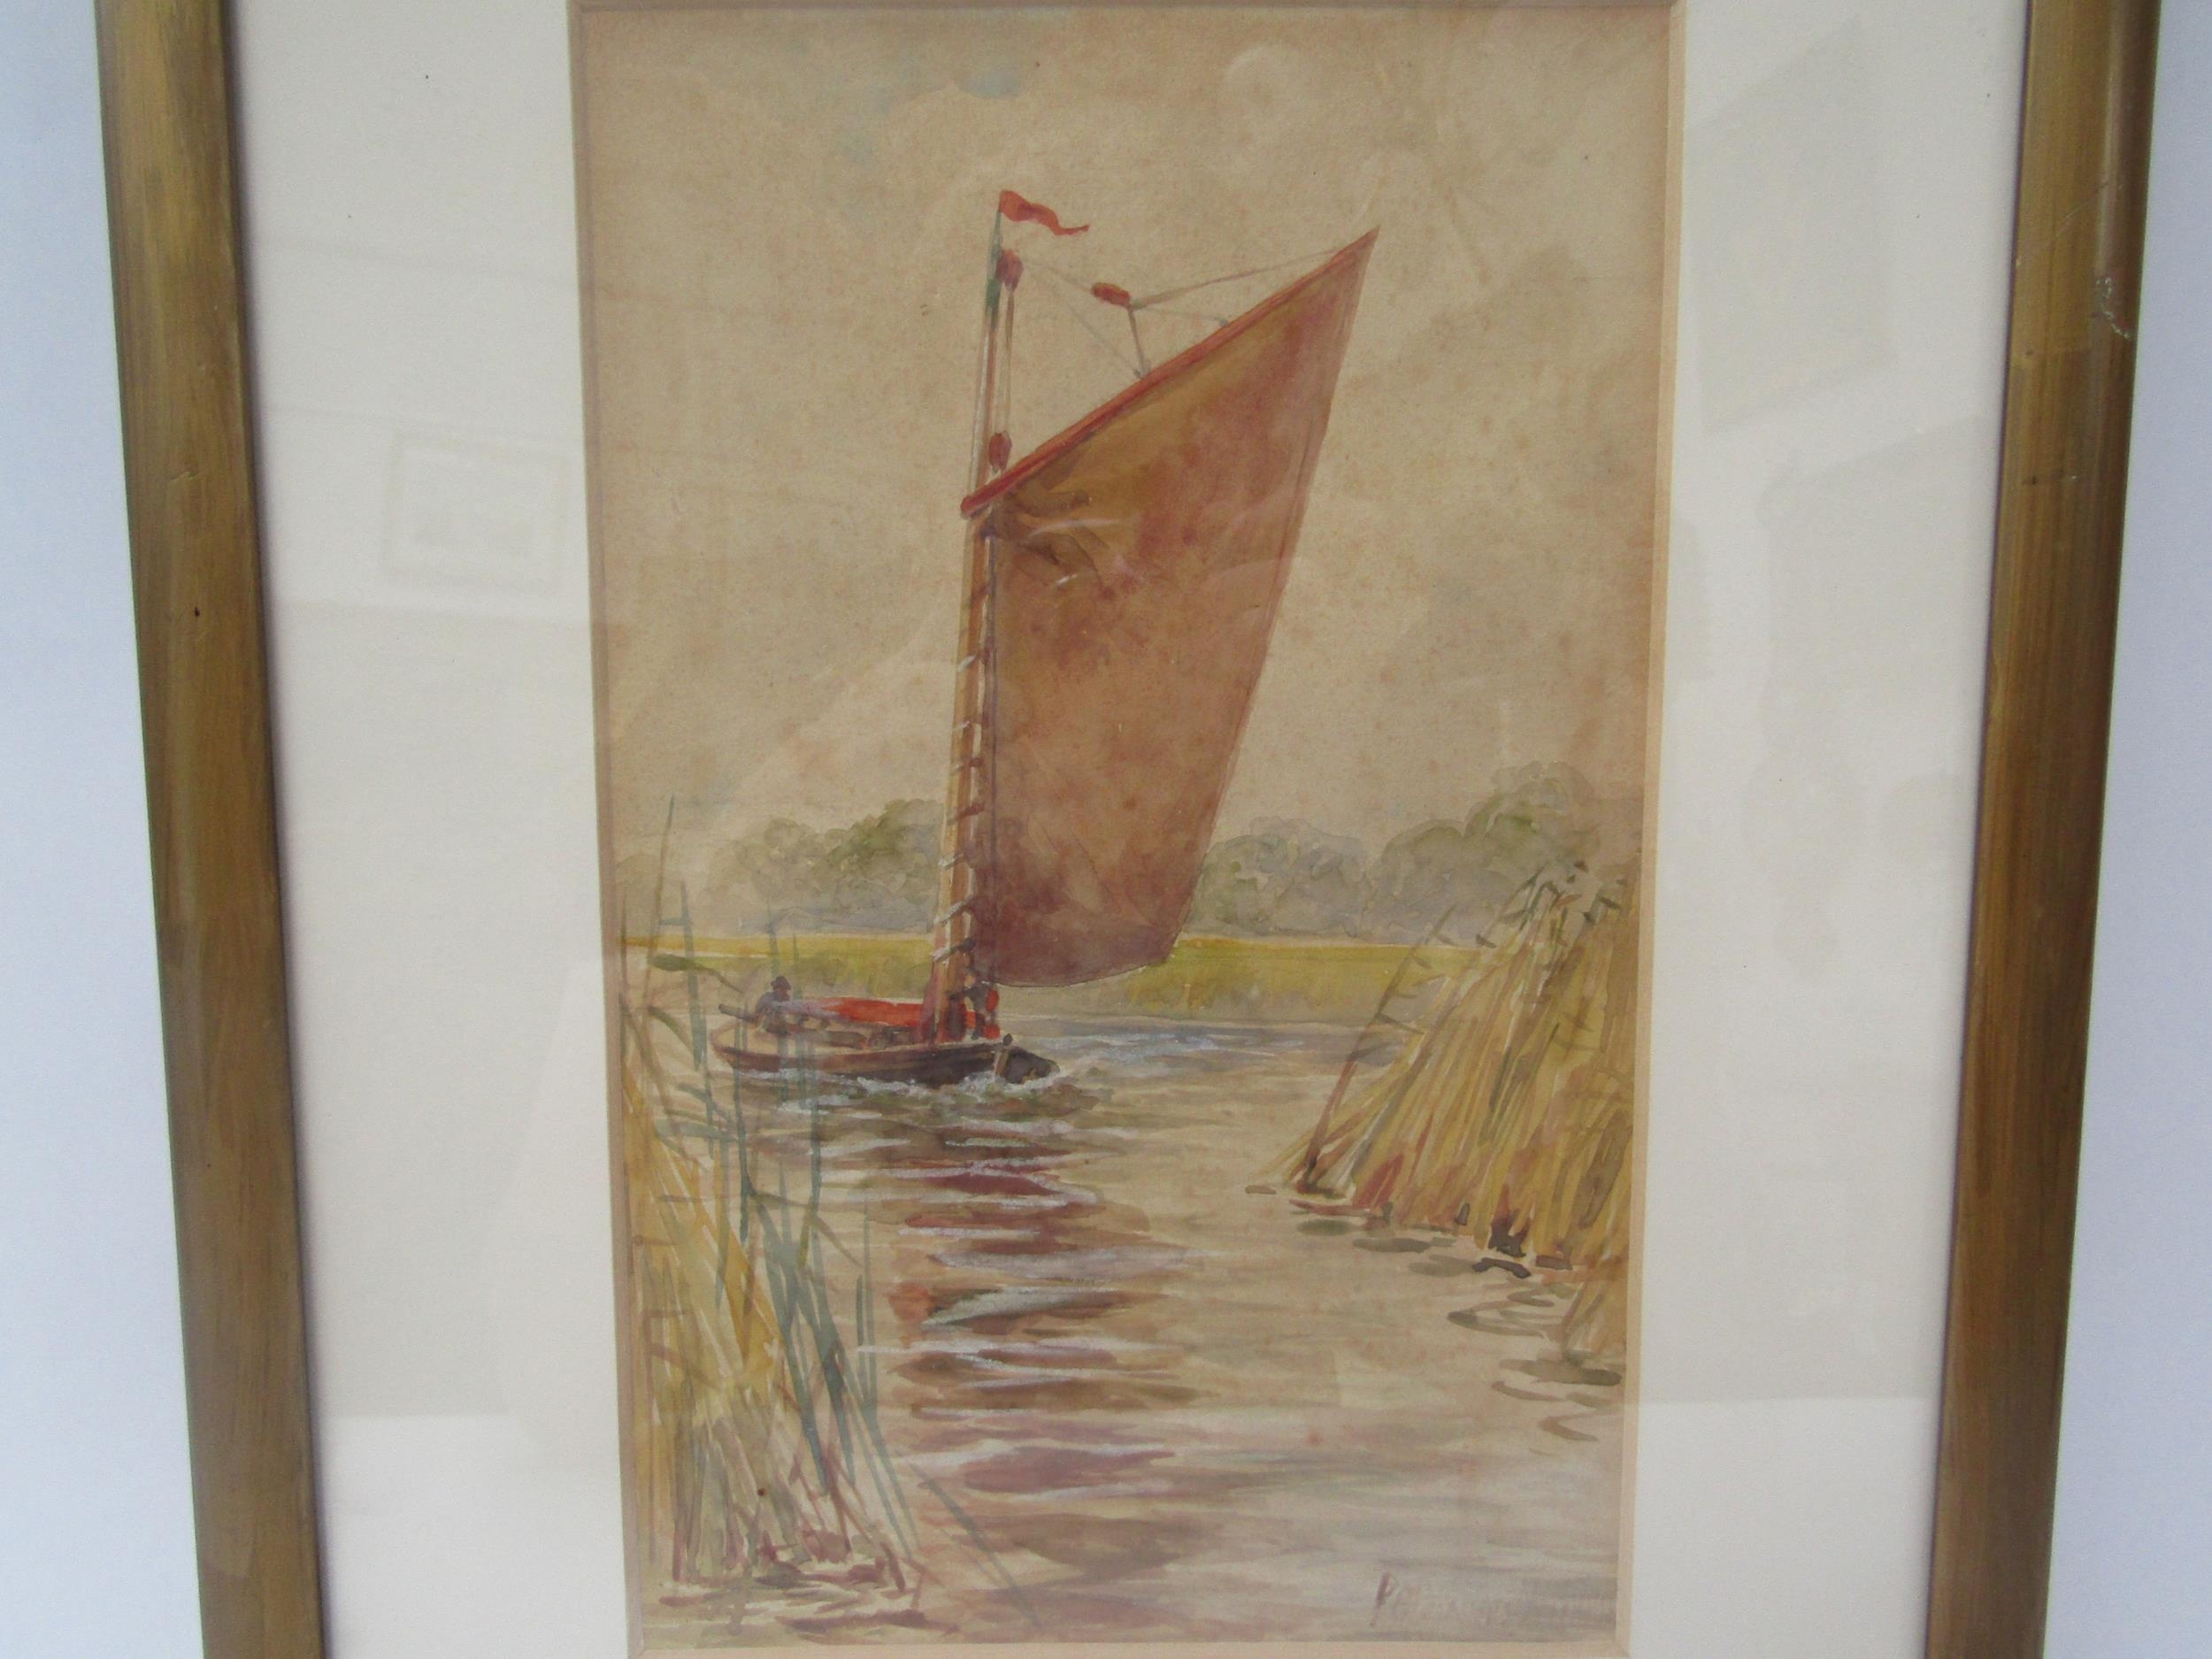 An early 20th Century watercolour depicting wherry boat sailing on the Broads, indistinctly - Image 2 of 4